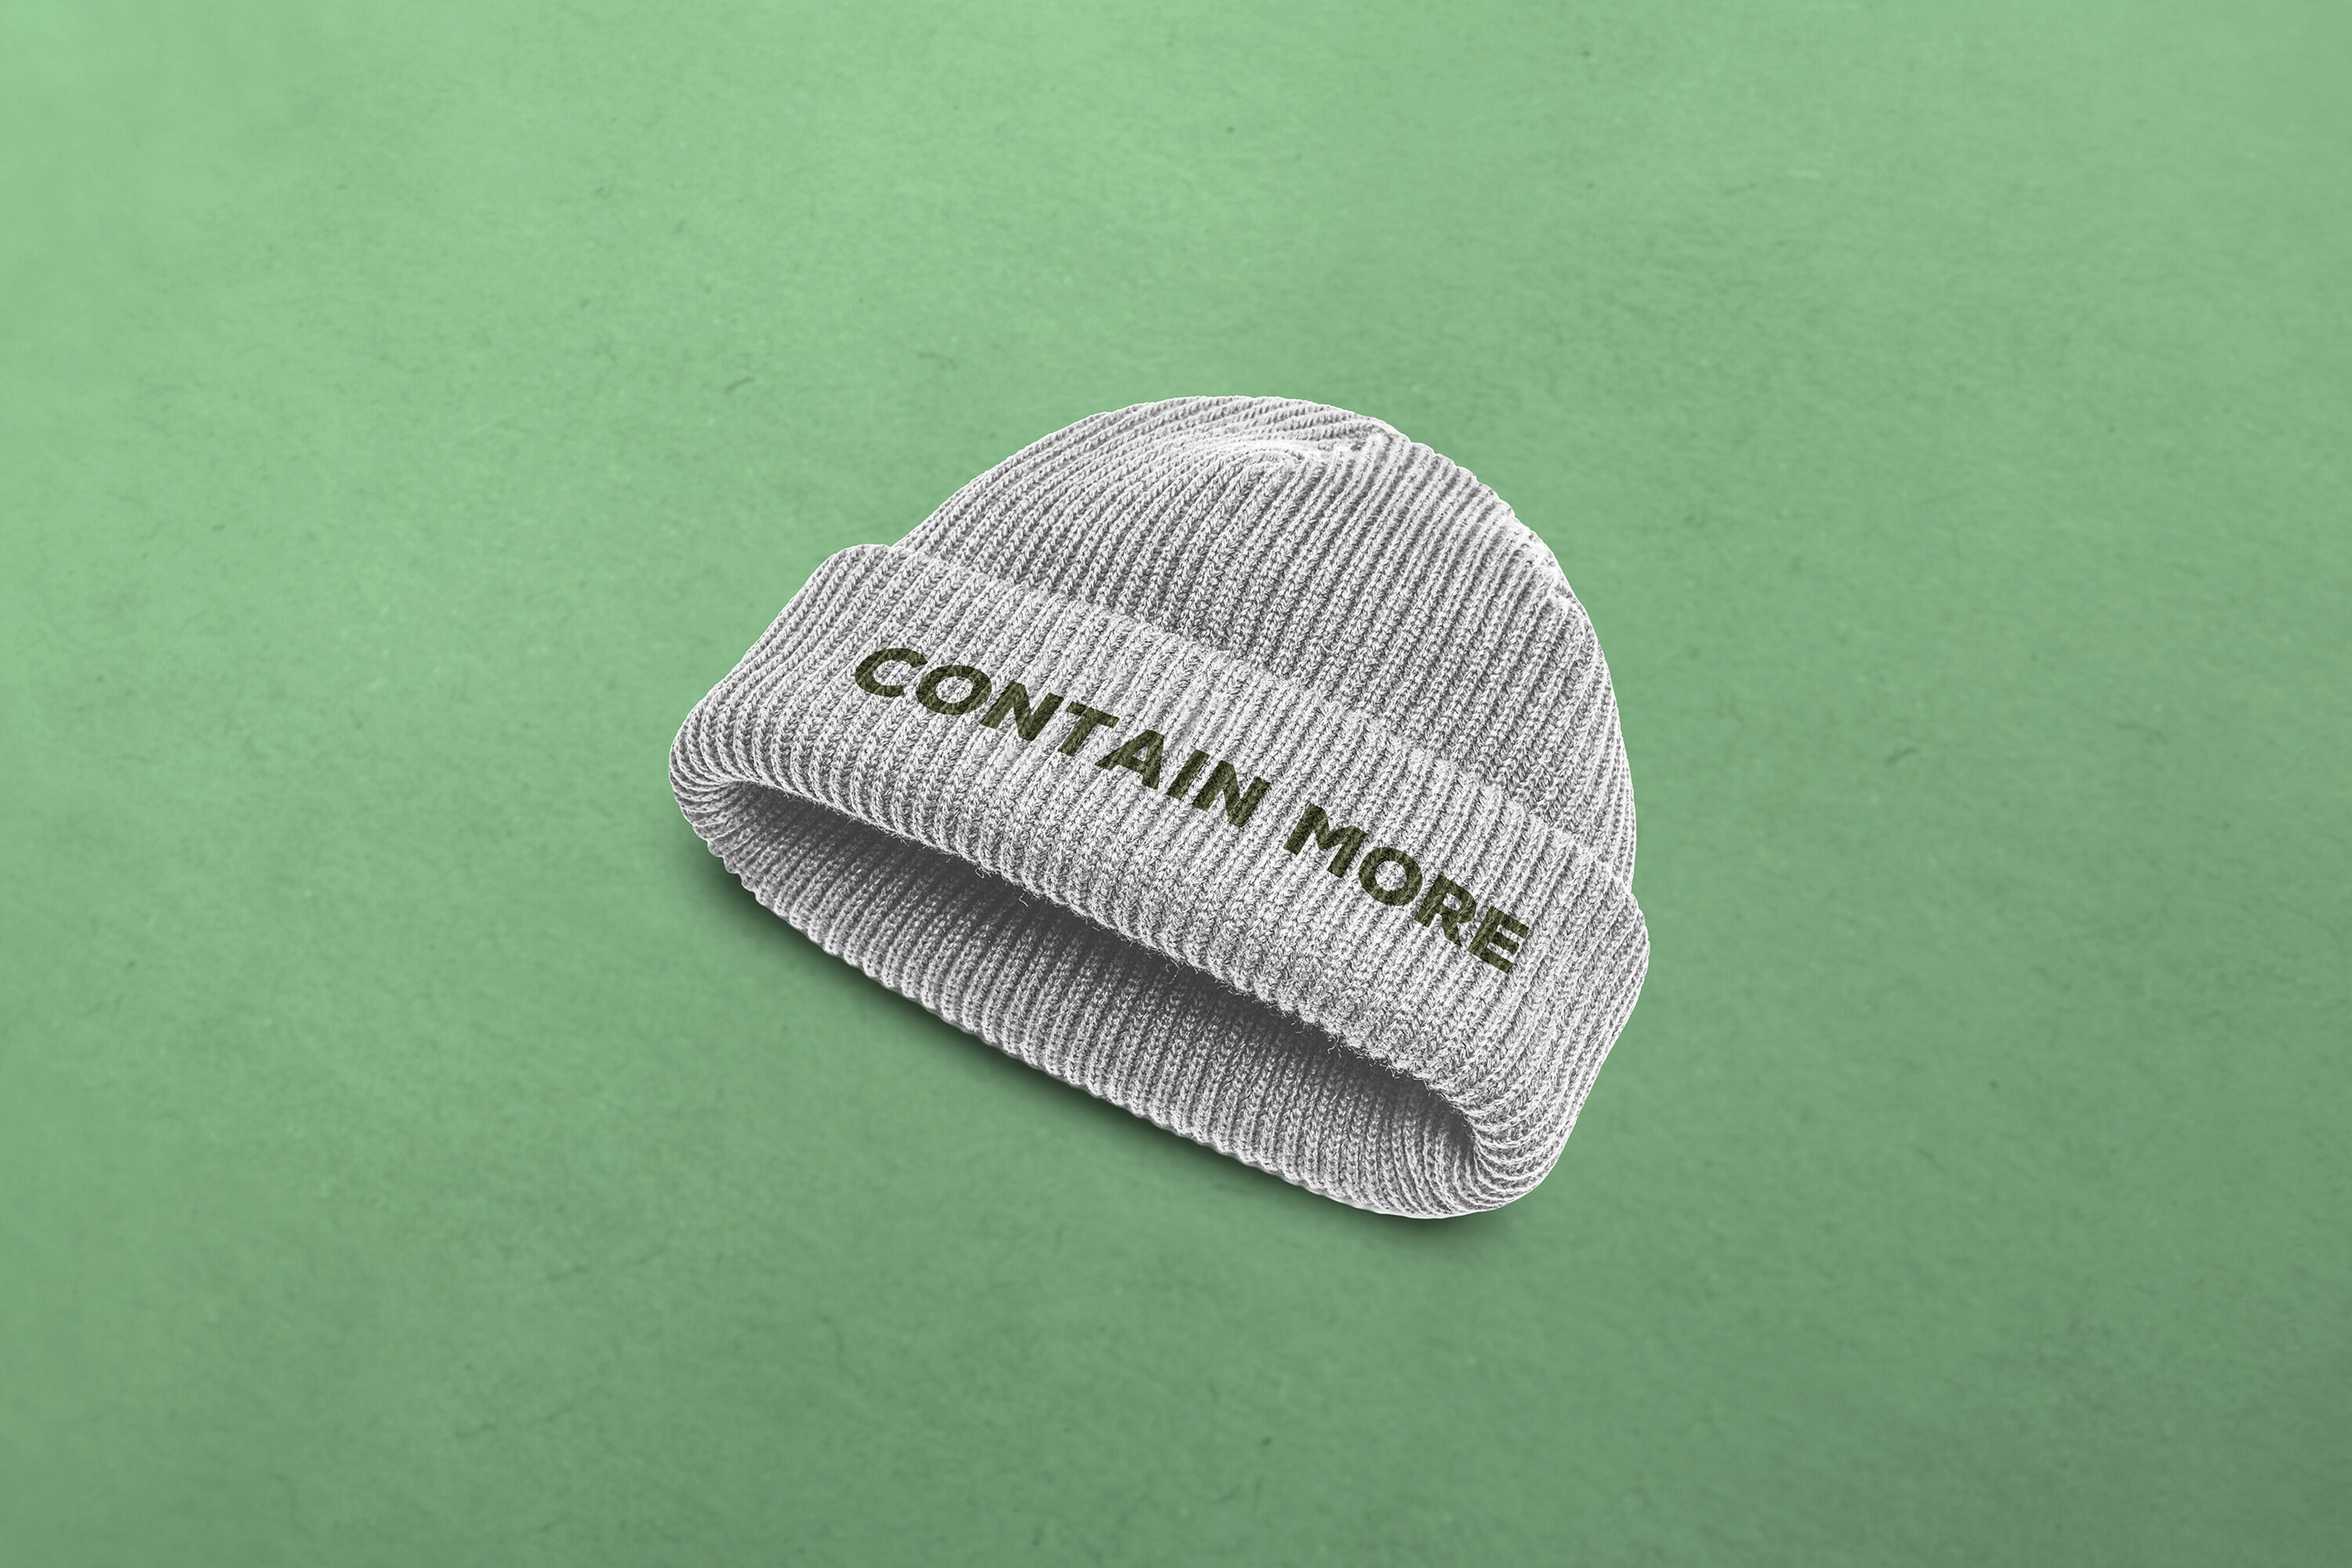 Download Beanie Mockup Free - Free Mockups | PSD Template | Design Assets